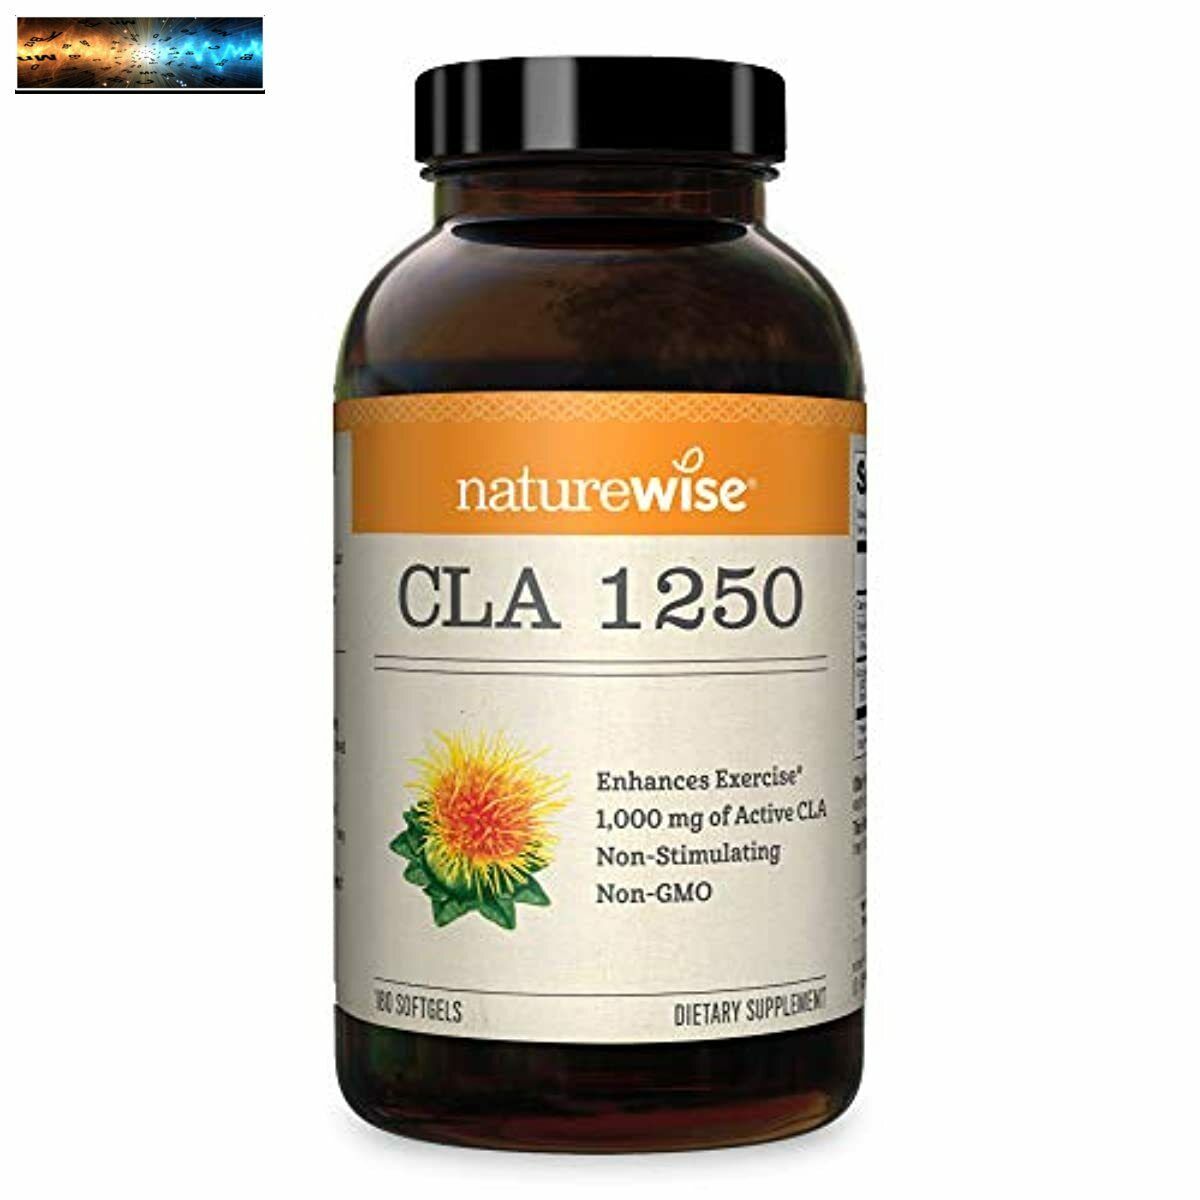 NatureWise CLA 1250 Natural Weight Loss Exercise Enhancement (2 Month Supply), I